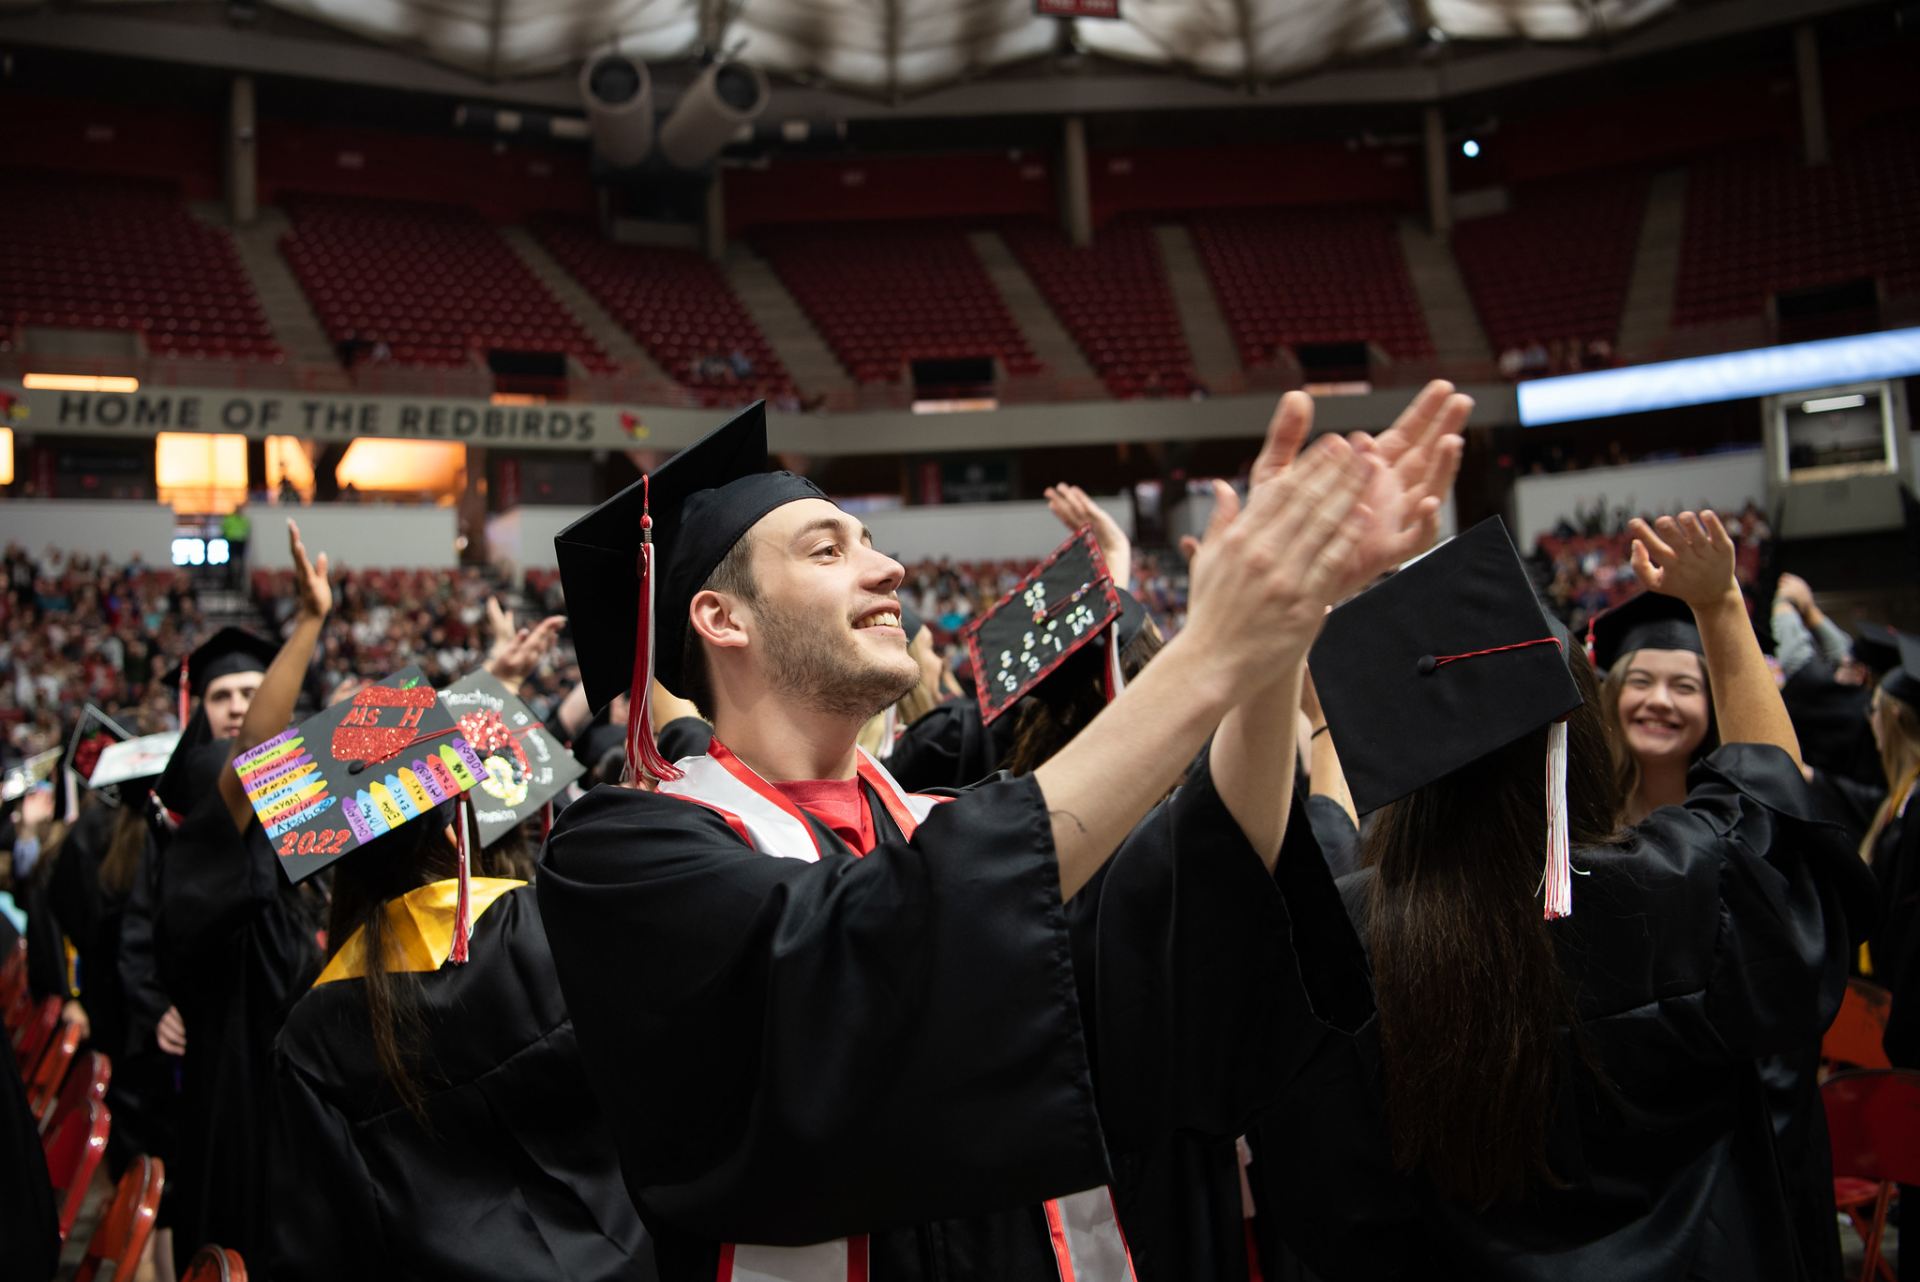 A person clapping their hands in the air as other graduates are in the background.